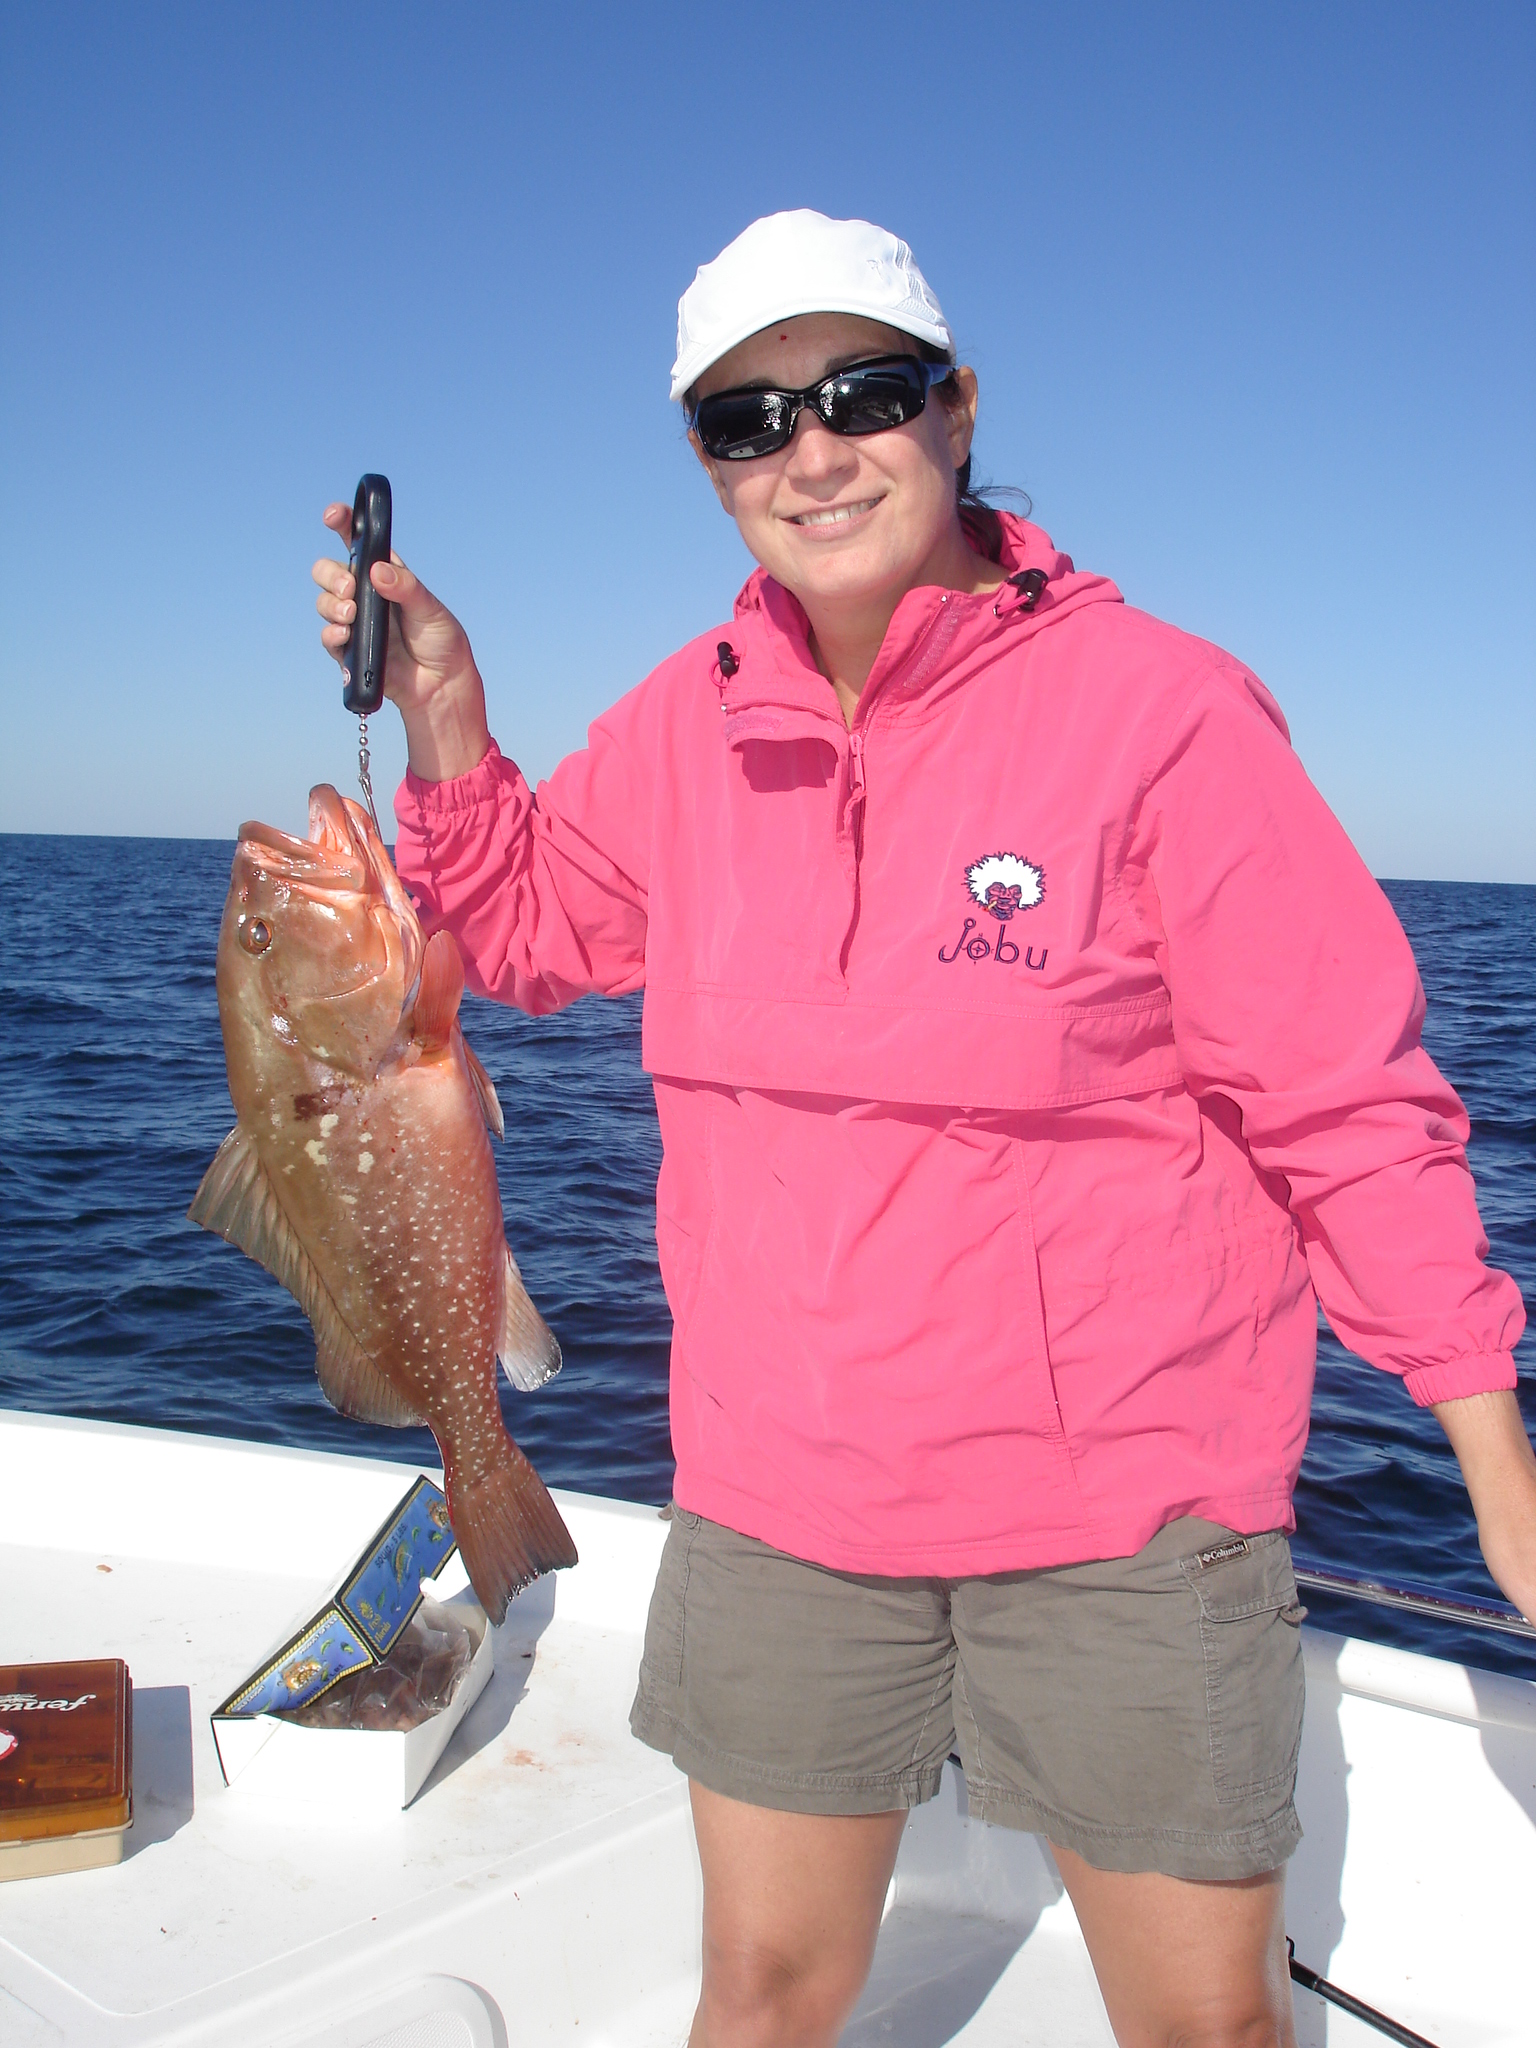 Just one more of the Jo part of Jobu with her proud catch back during some cooler weather.